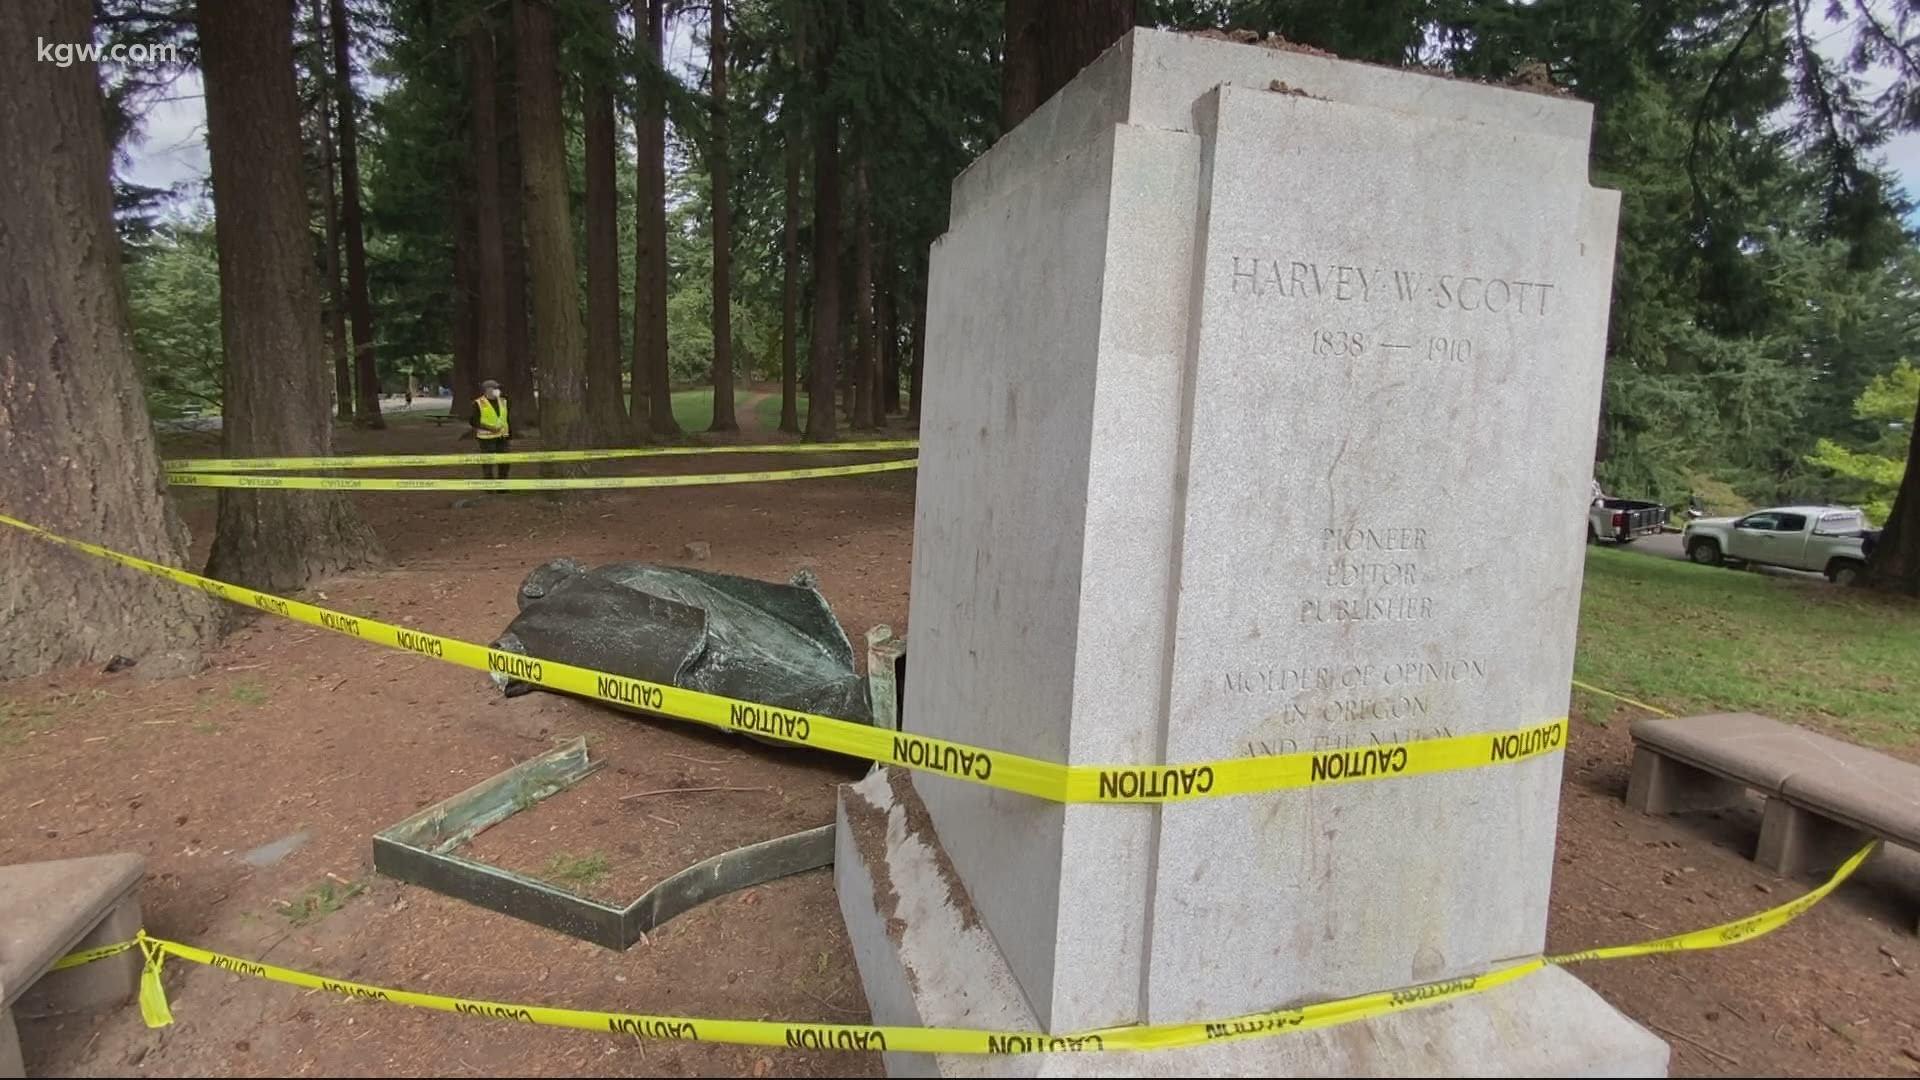 A statue of Harvey Scott was toppled overnight. Scott was a longtime editor at The Oregonian and the brother of Abigail Scott Duniway, a champion for women's rights.